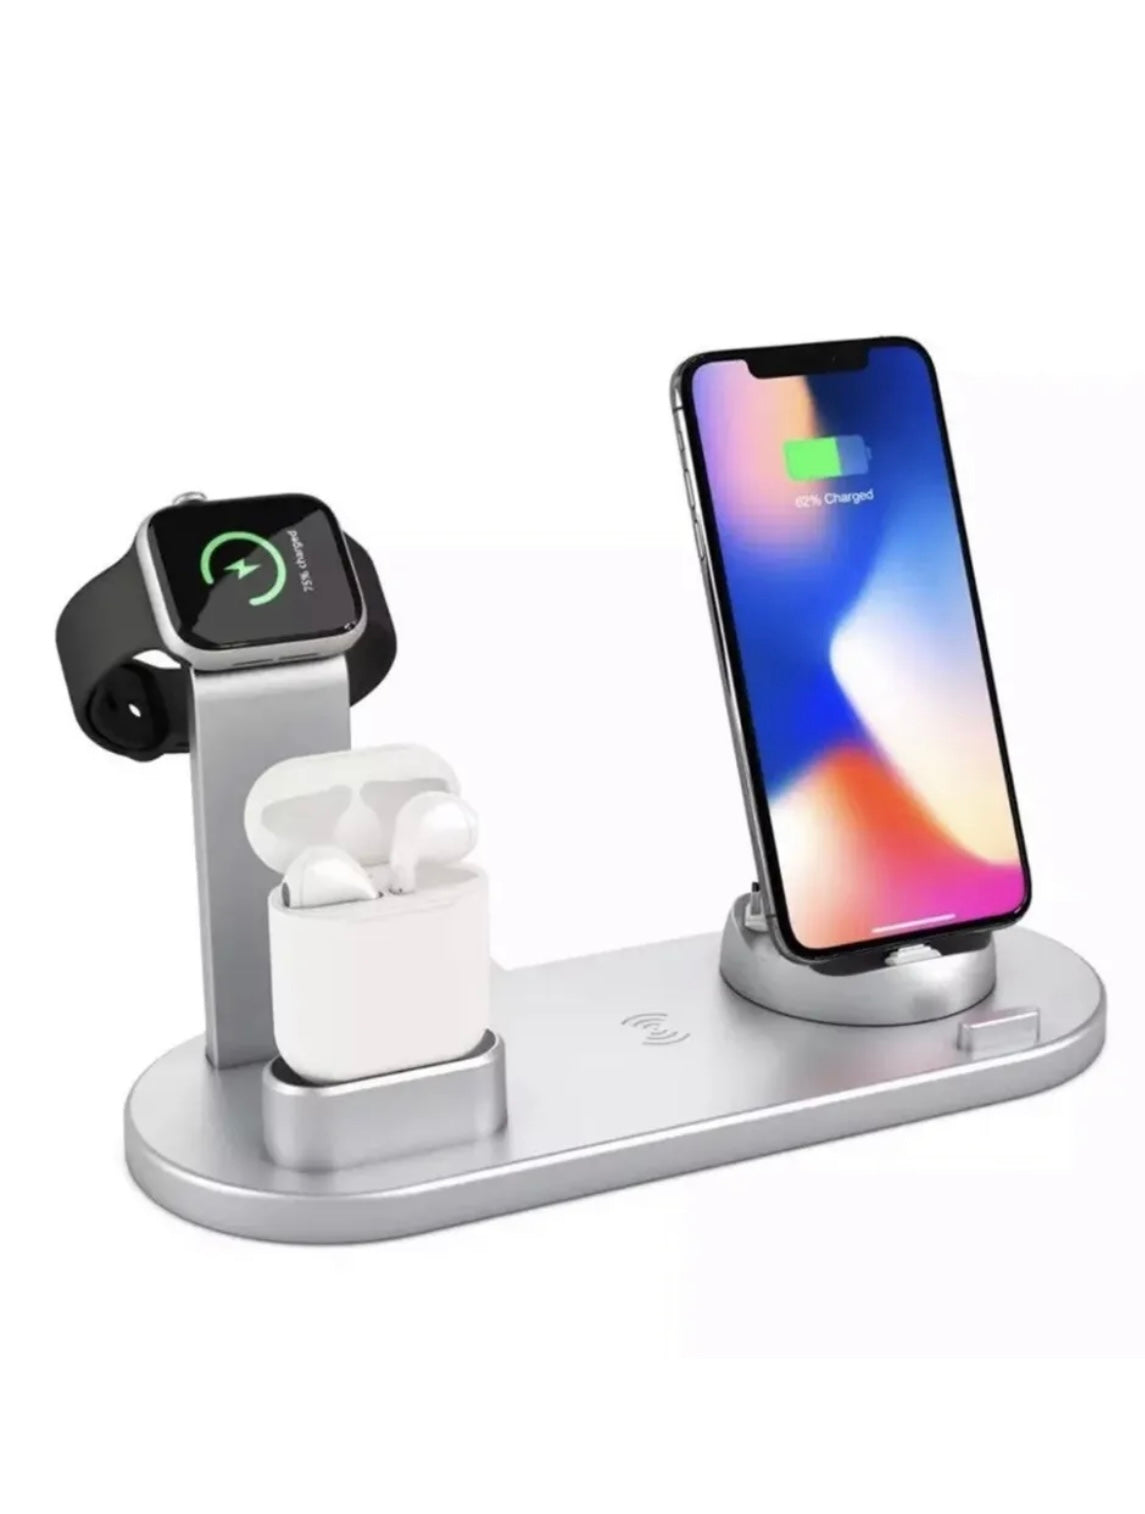 Wireless Charger 4in1 Charging Station Dock Pad For Samsung Iphone Airpod/Watch Silver or Gray